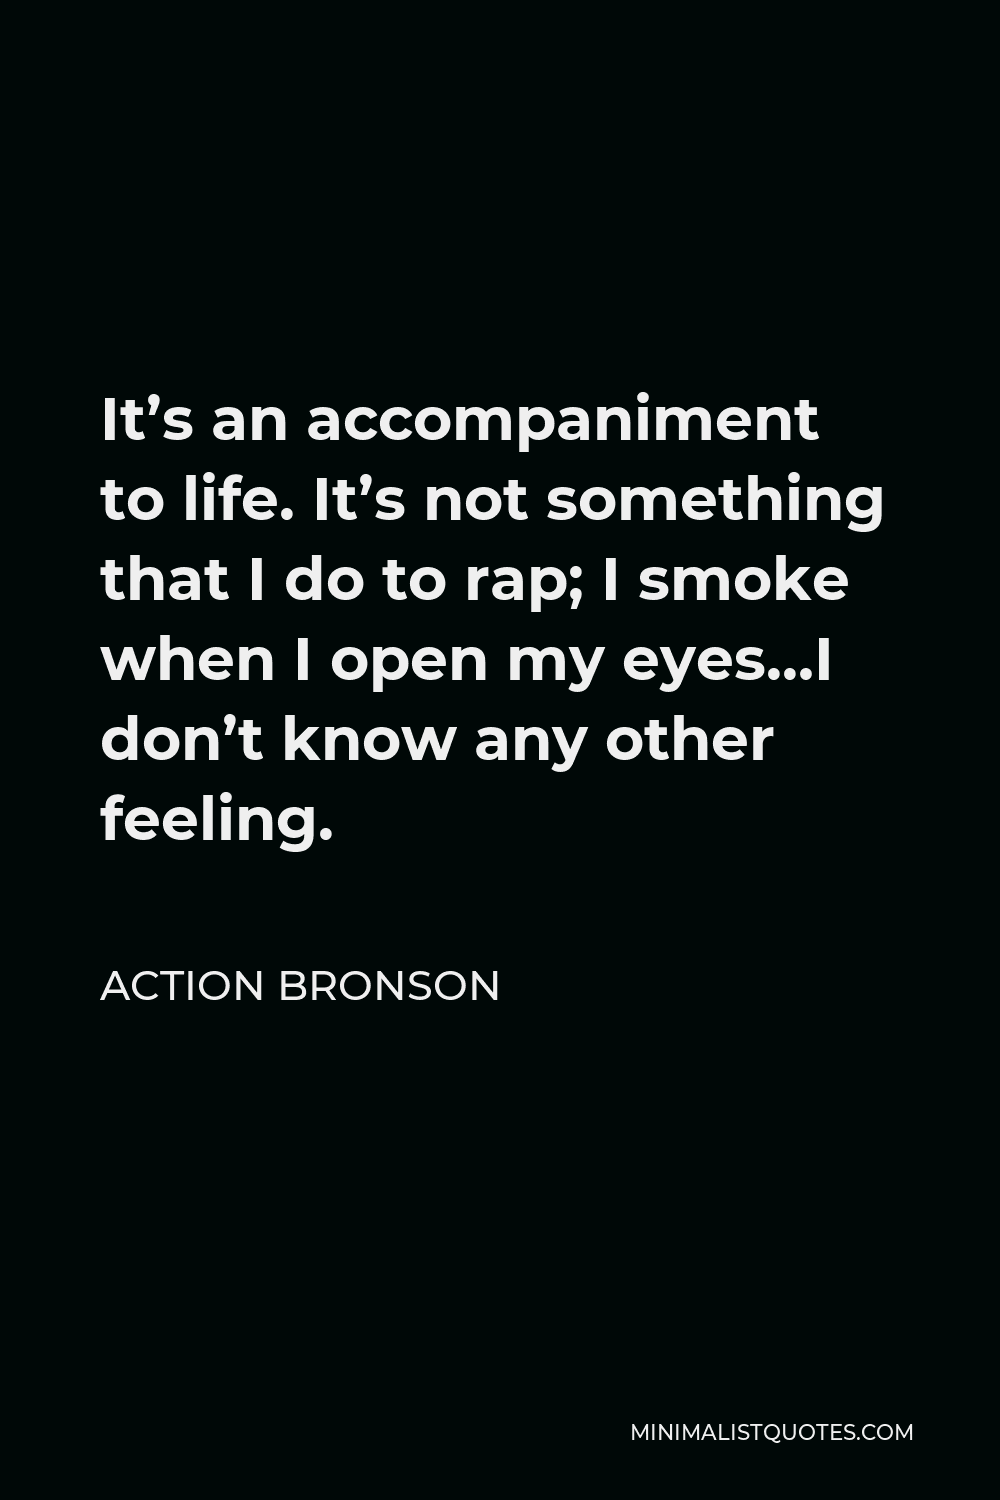 Action Bronson Quote - It’s an accompaniment to life. It’s not something that I do to rap; I smoke when I open my eyes…I don’t know any other feeling.